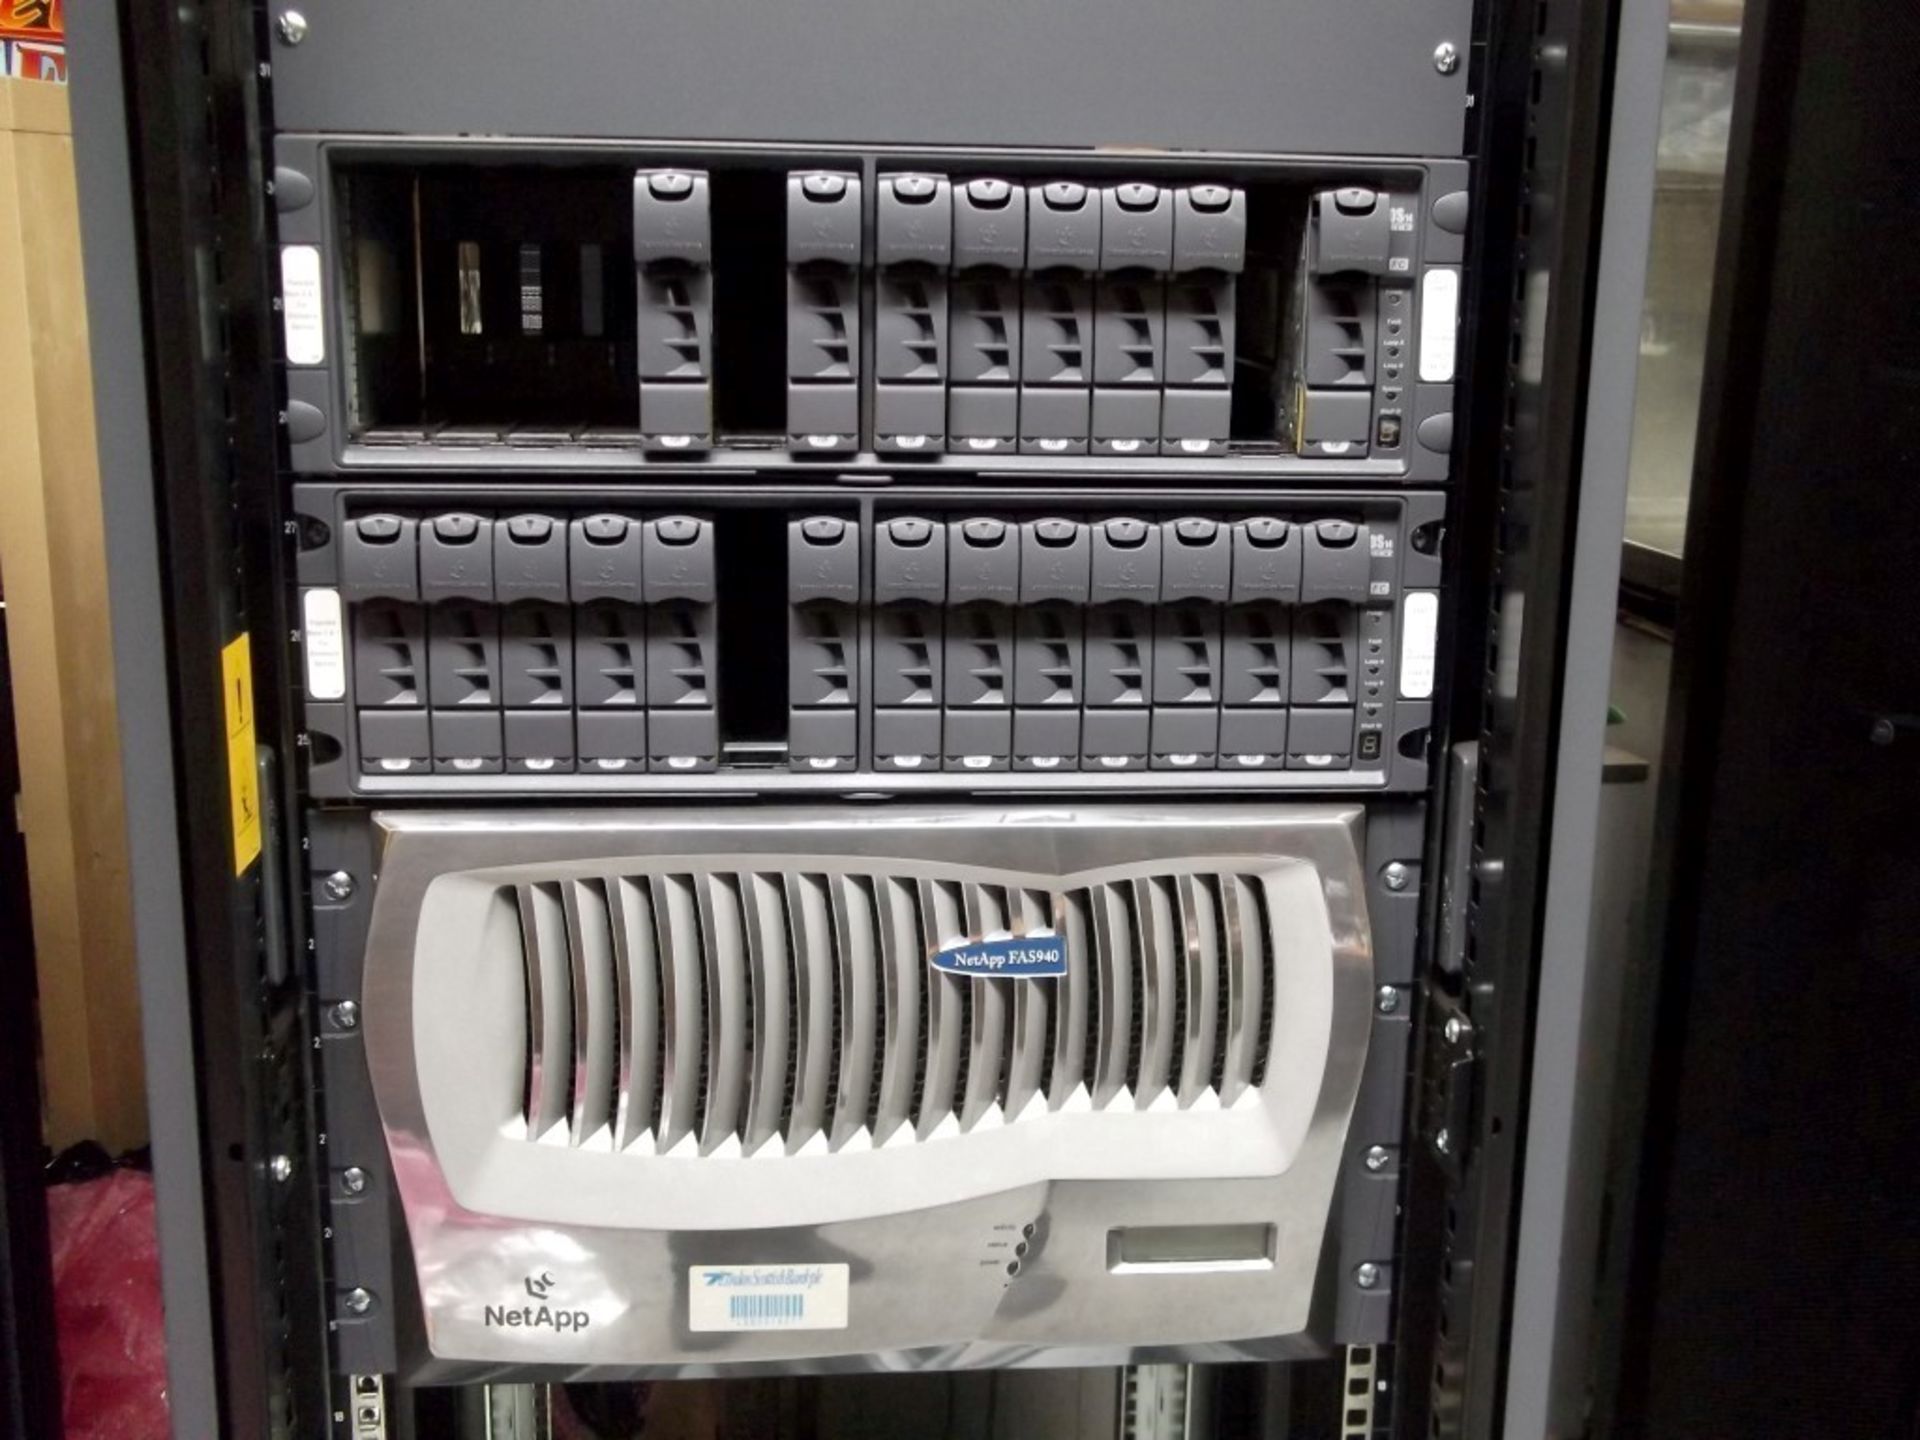 1 x Net APP Server Rack With NetApp FAS940 and A Selection of Drive Bays - CL106 - Ref: NSB007 - - Image 2 of 3